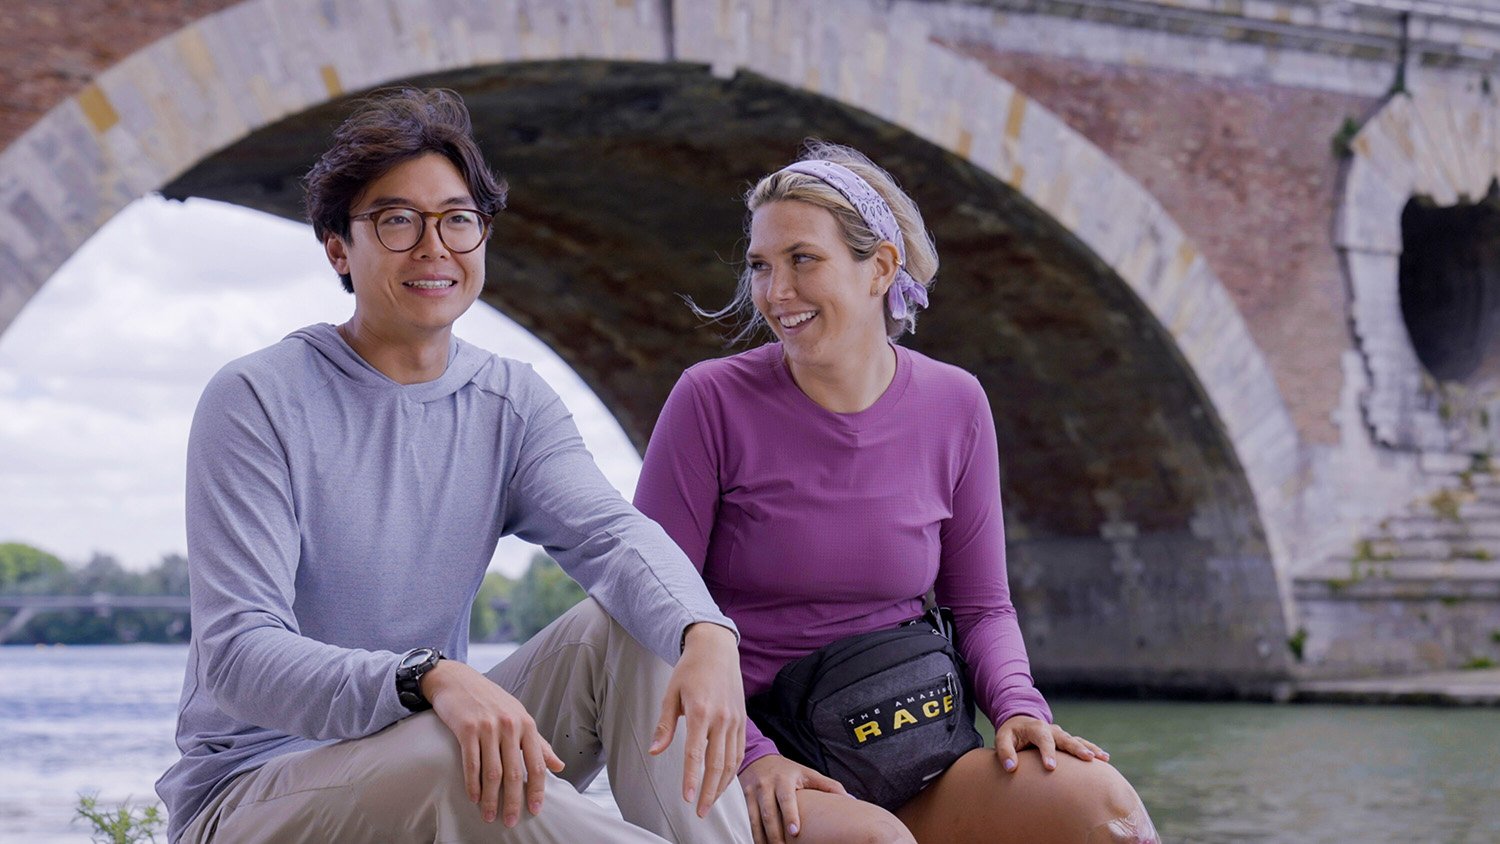 Derek Xiao and Claire Rehfuss talk prize money on The Amazing Race Season 34